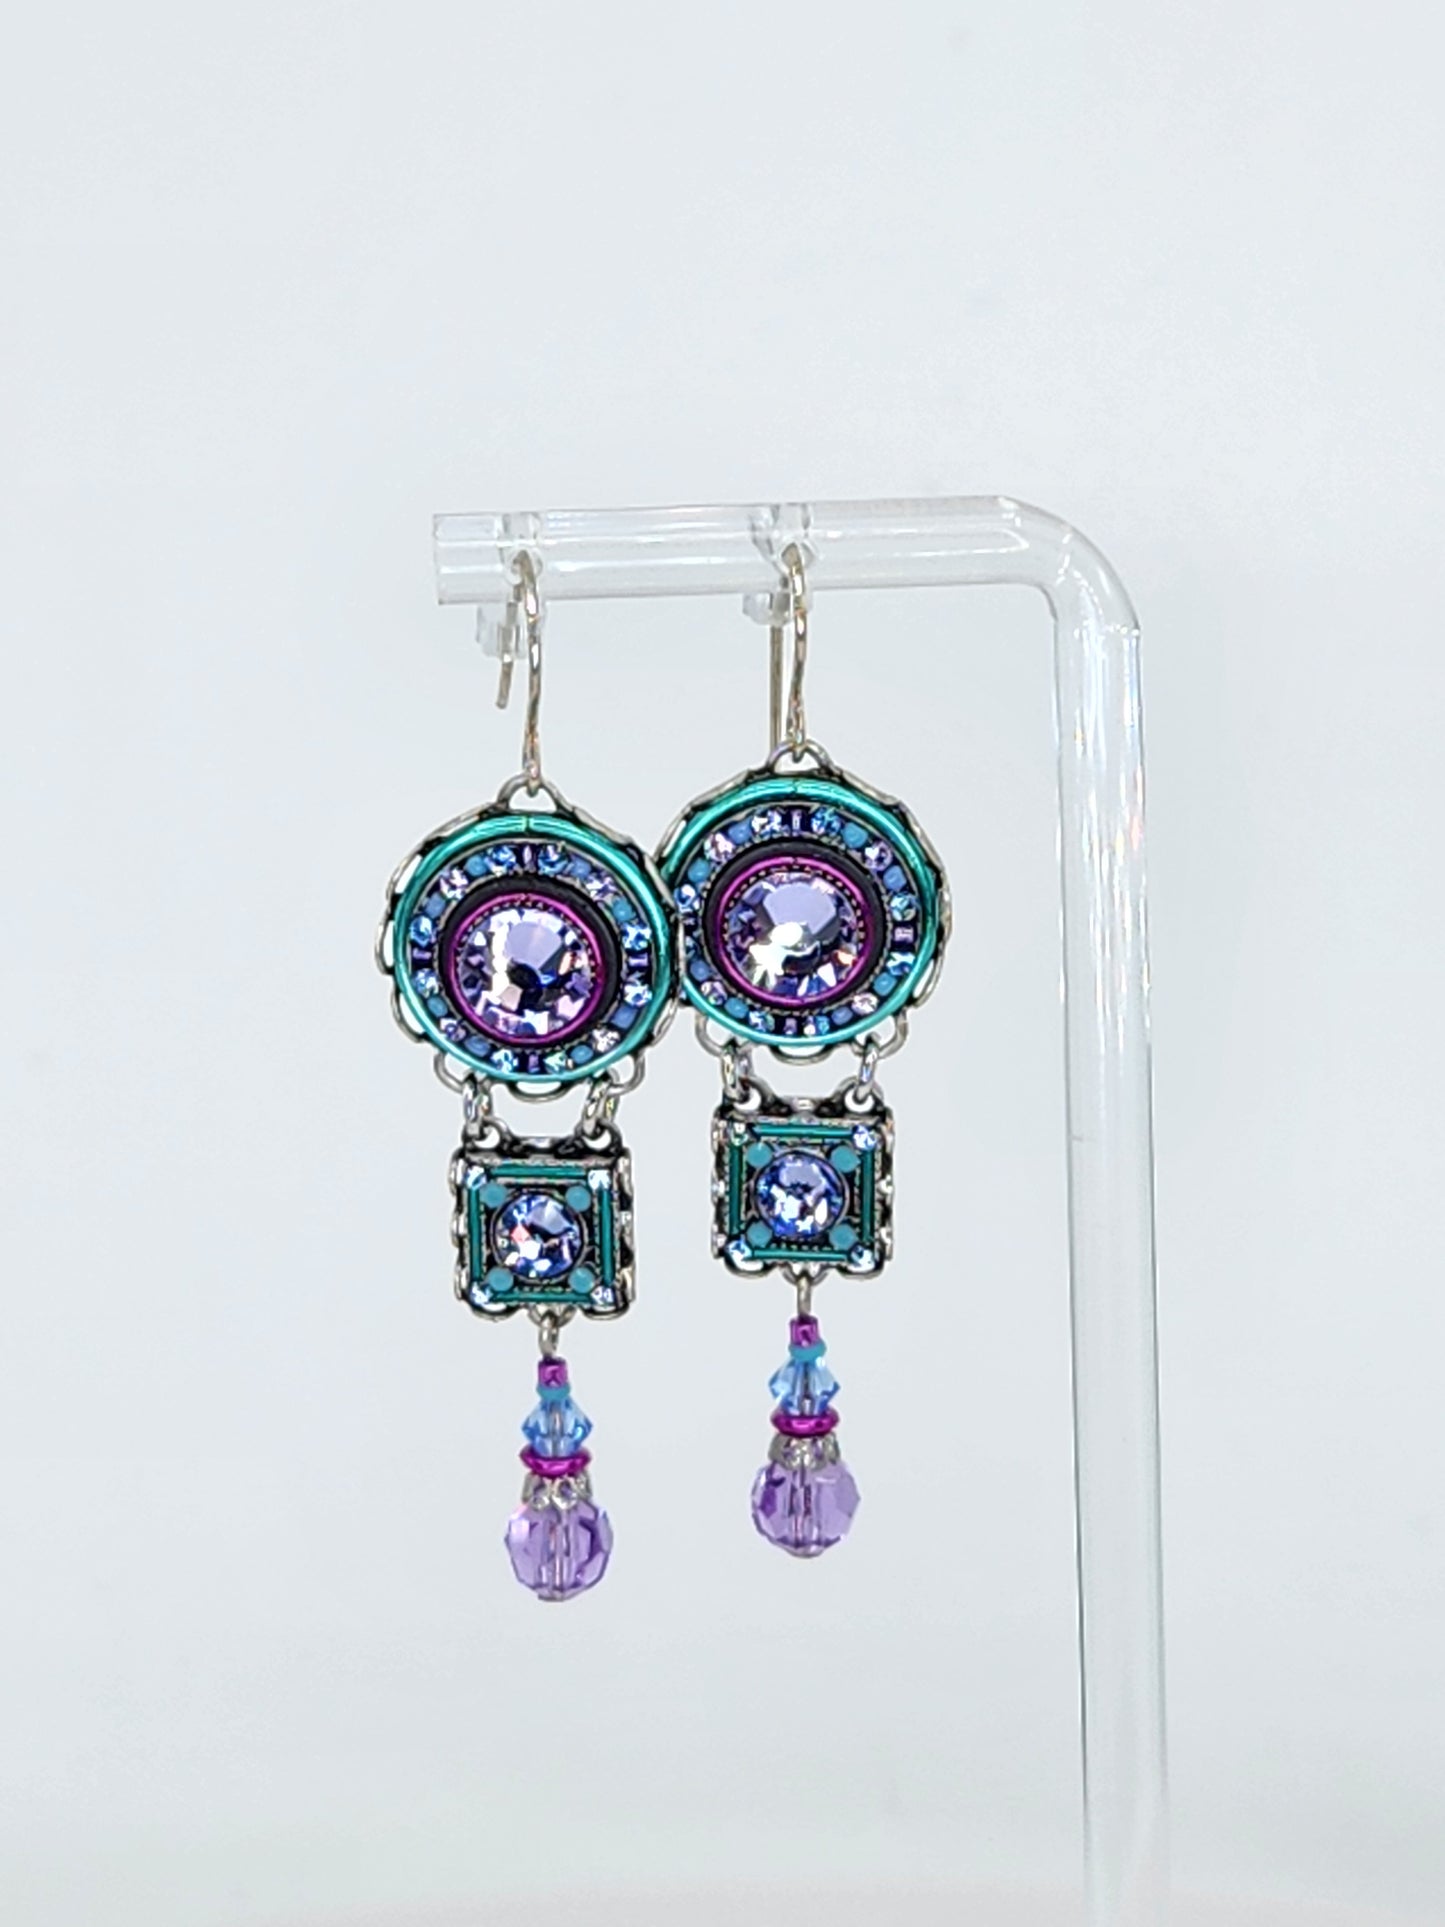 Firefly - Lavender and Blue Earrings with Swarovski Crystals